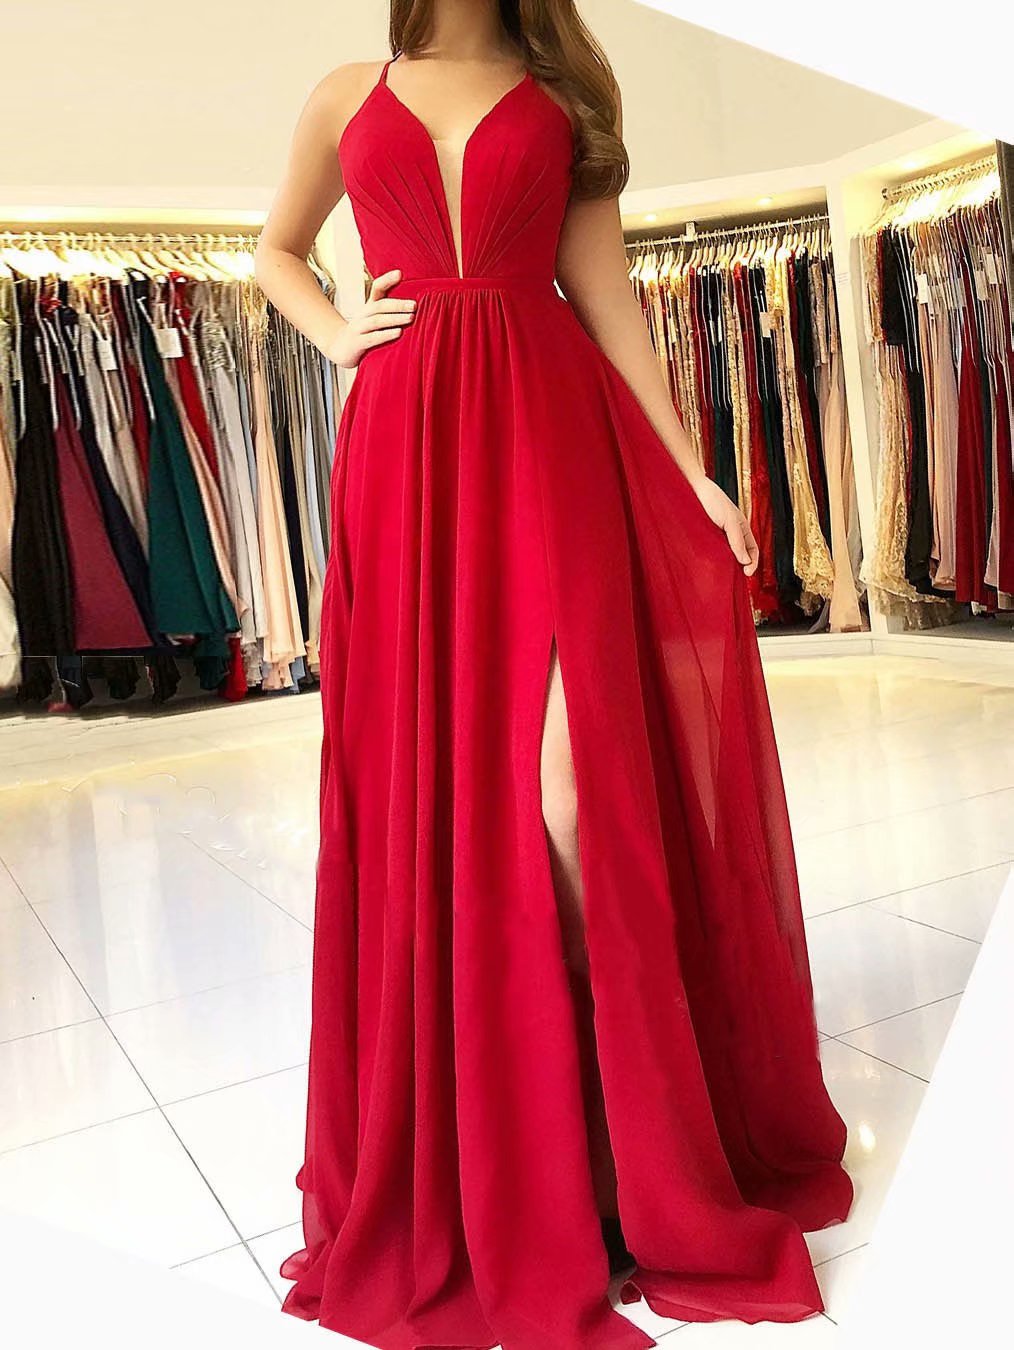 Floor Length Red Prom Gowns Chiffon Formal Dresses With Deep V Neckline And Side Split-- Long Elegant Prom Dresses, Sexy Evening Gowns